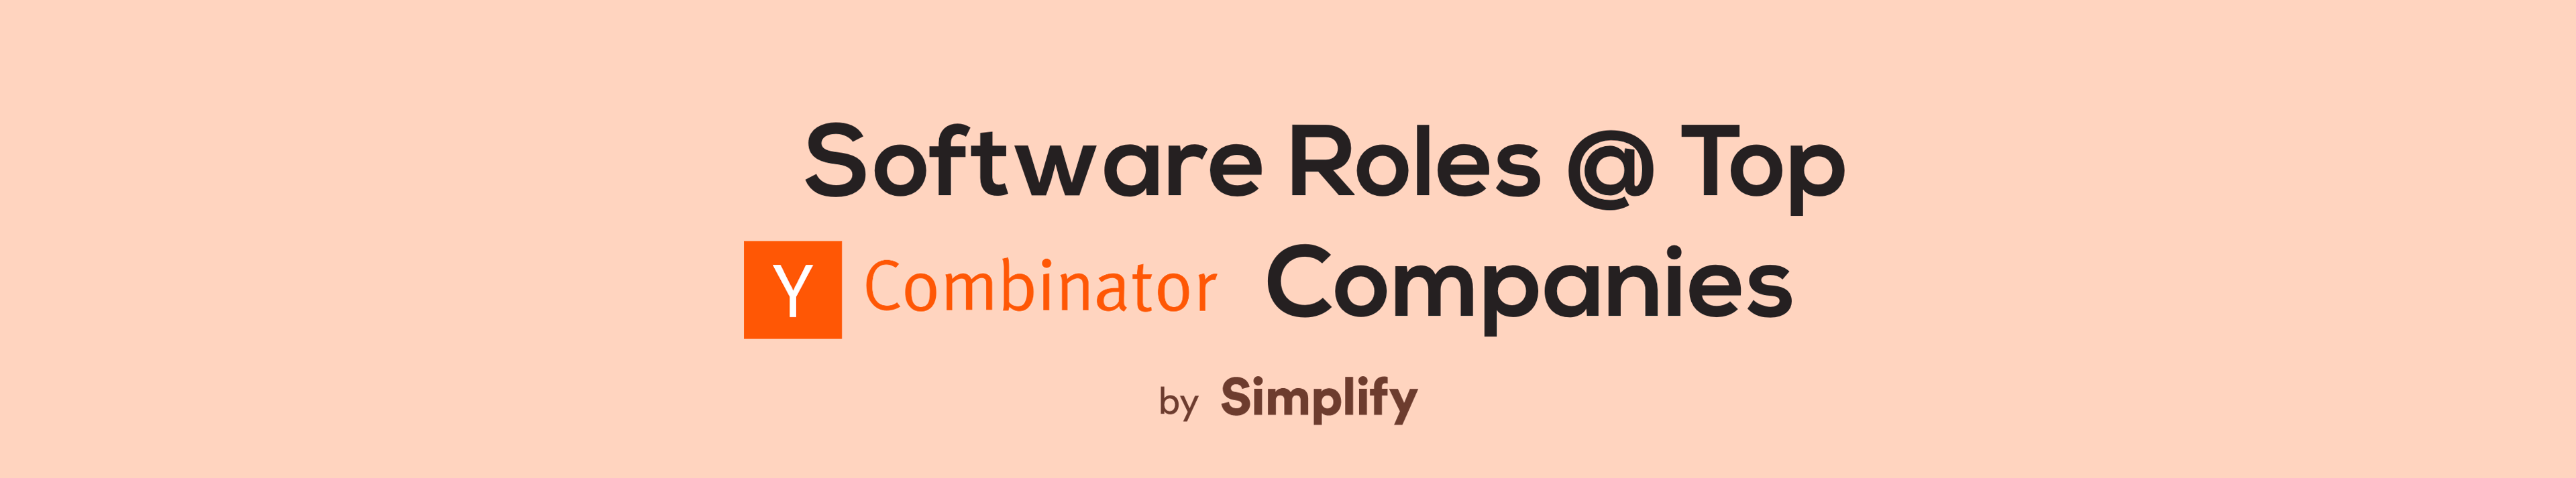 text that says “Software Roles @ Top YC Companies by Simplify” on an orange background